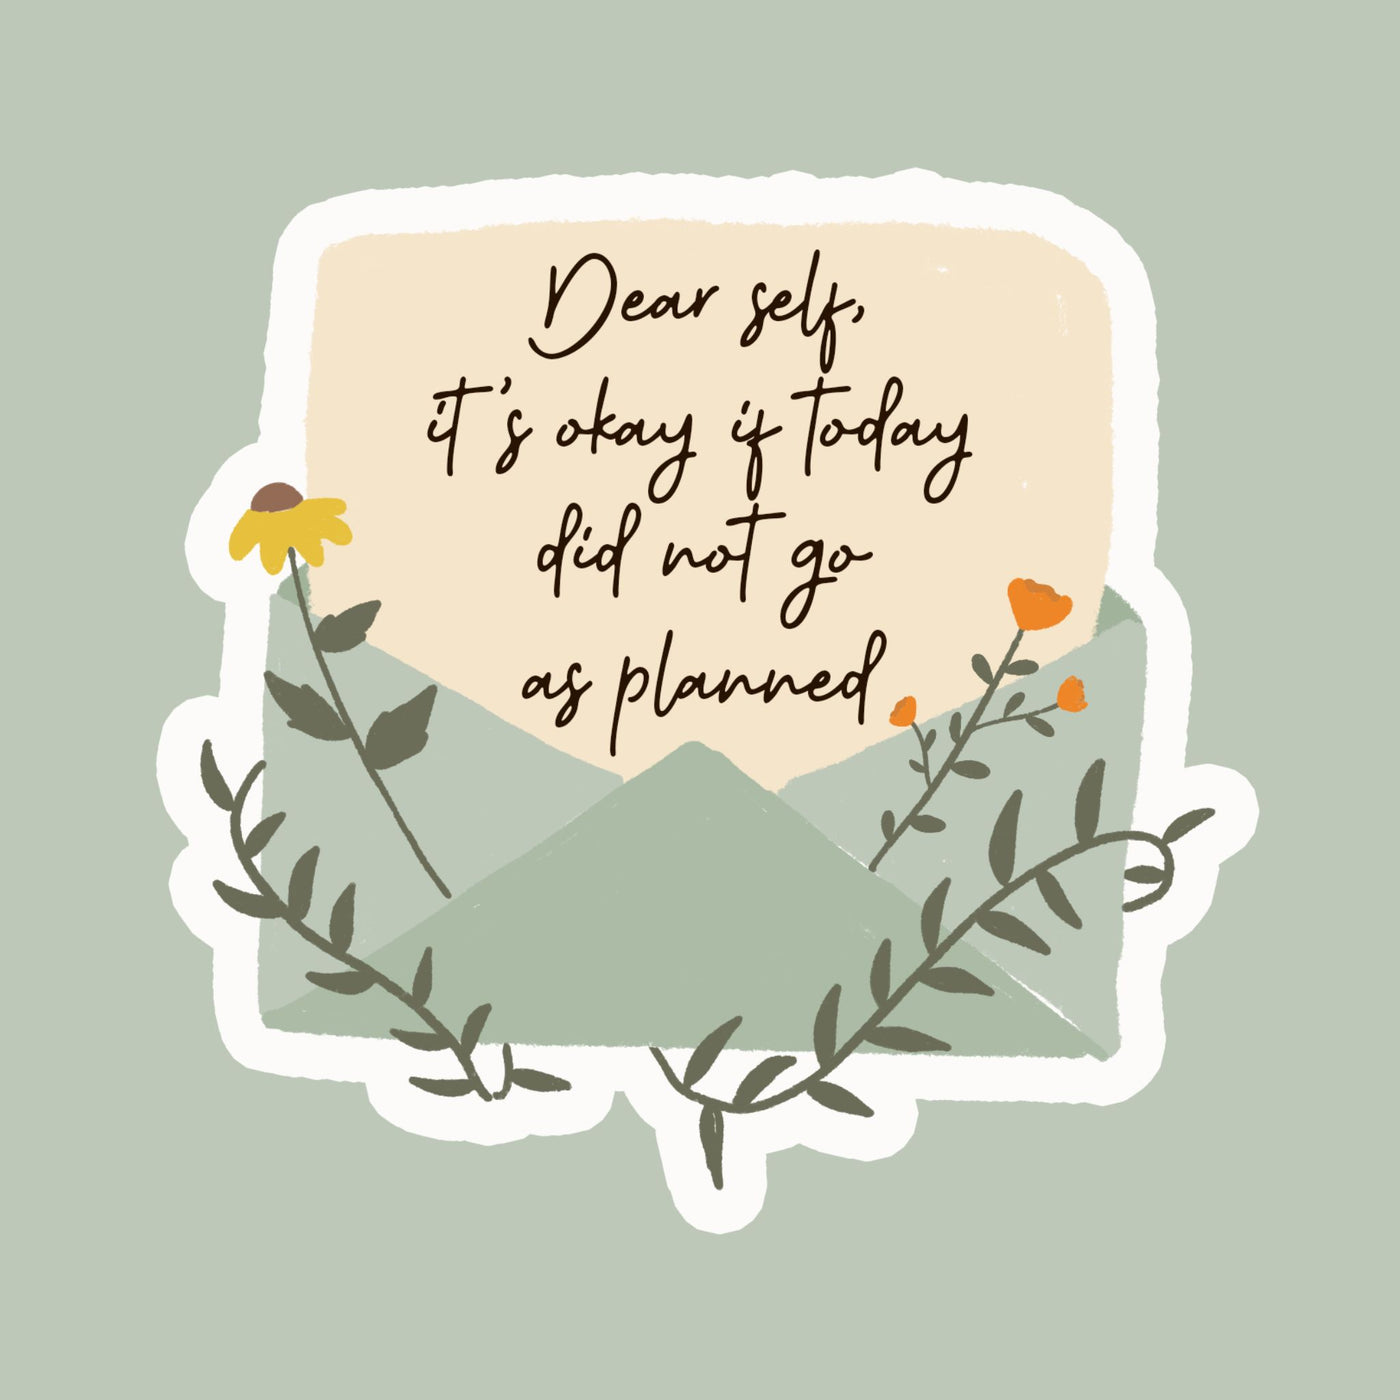 IT'S OKAY IF TODAY DID NOT GO AS PLANNED STICKER - Bold&Goodly